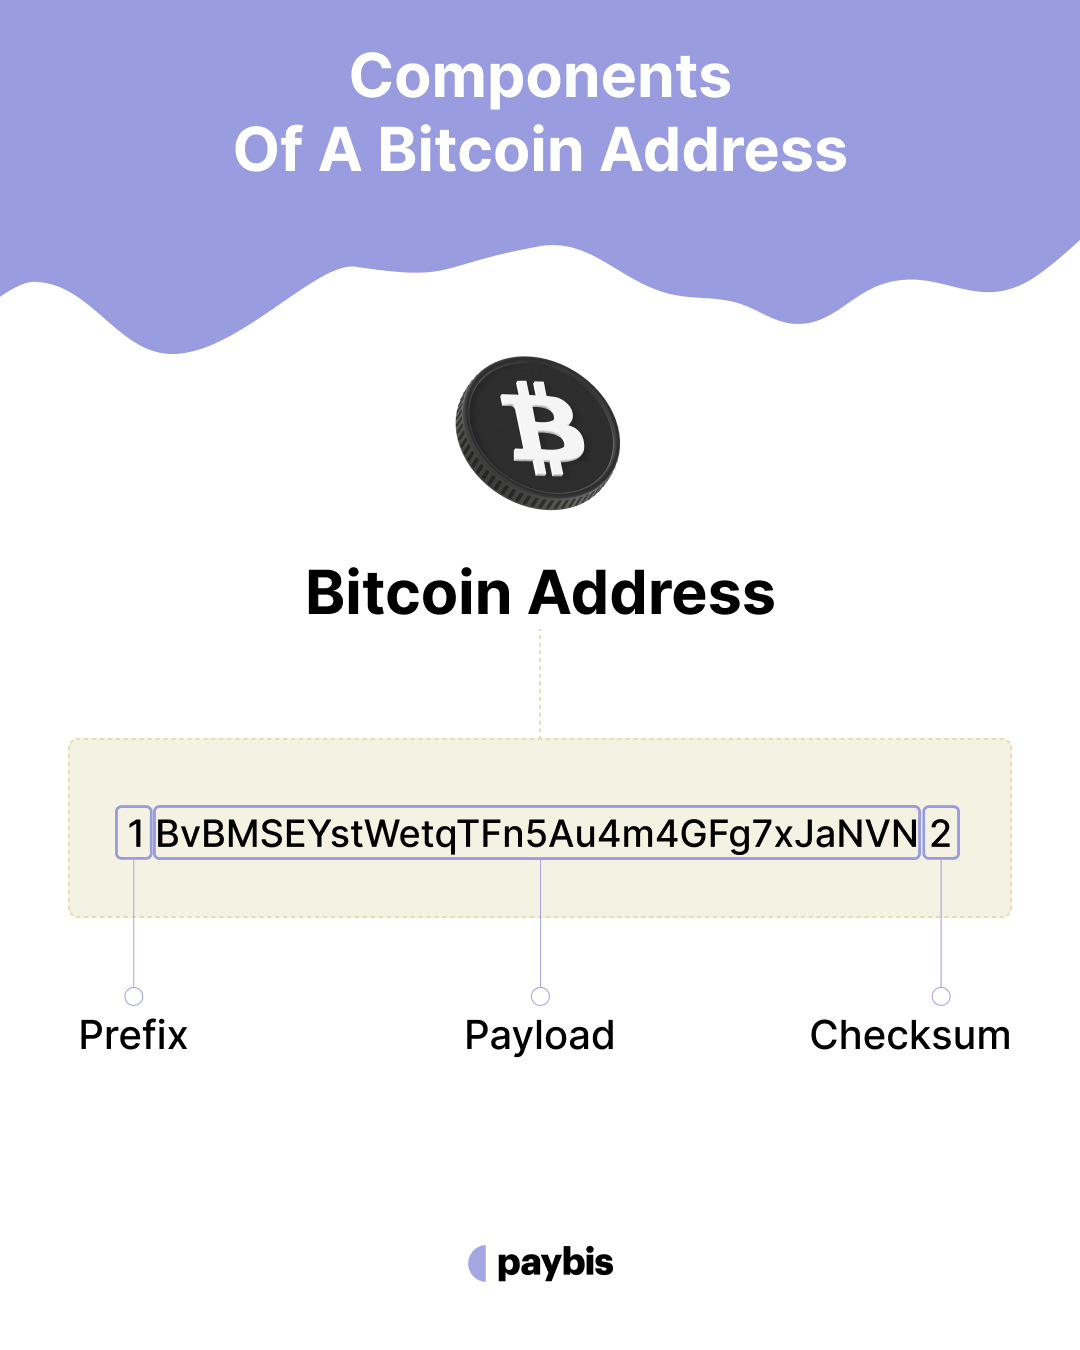 Structure of a Bitcoin Public Address